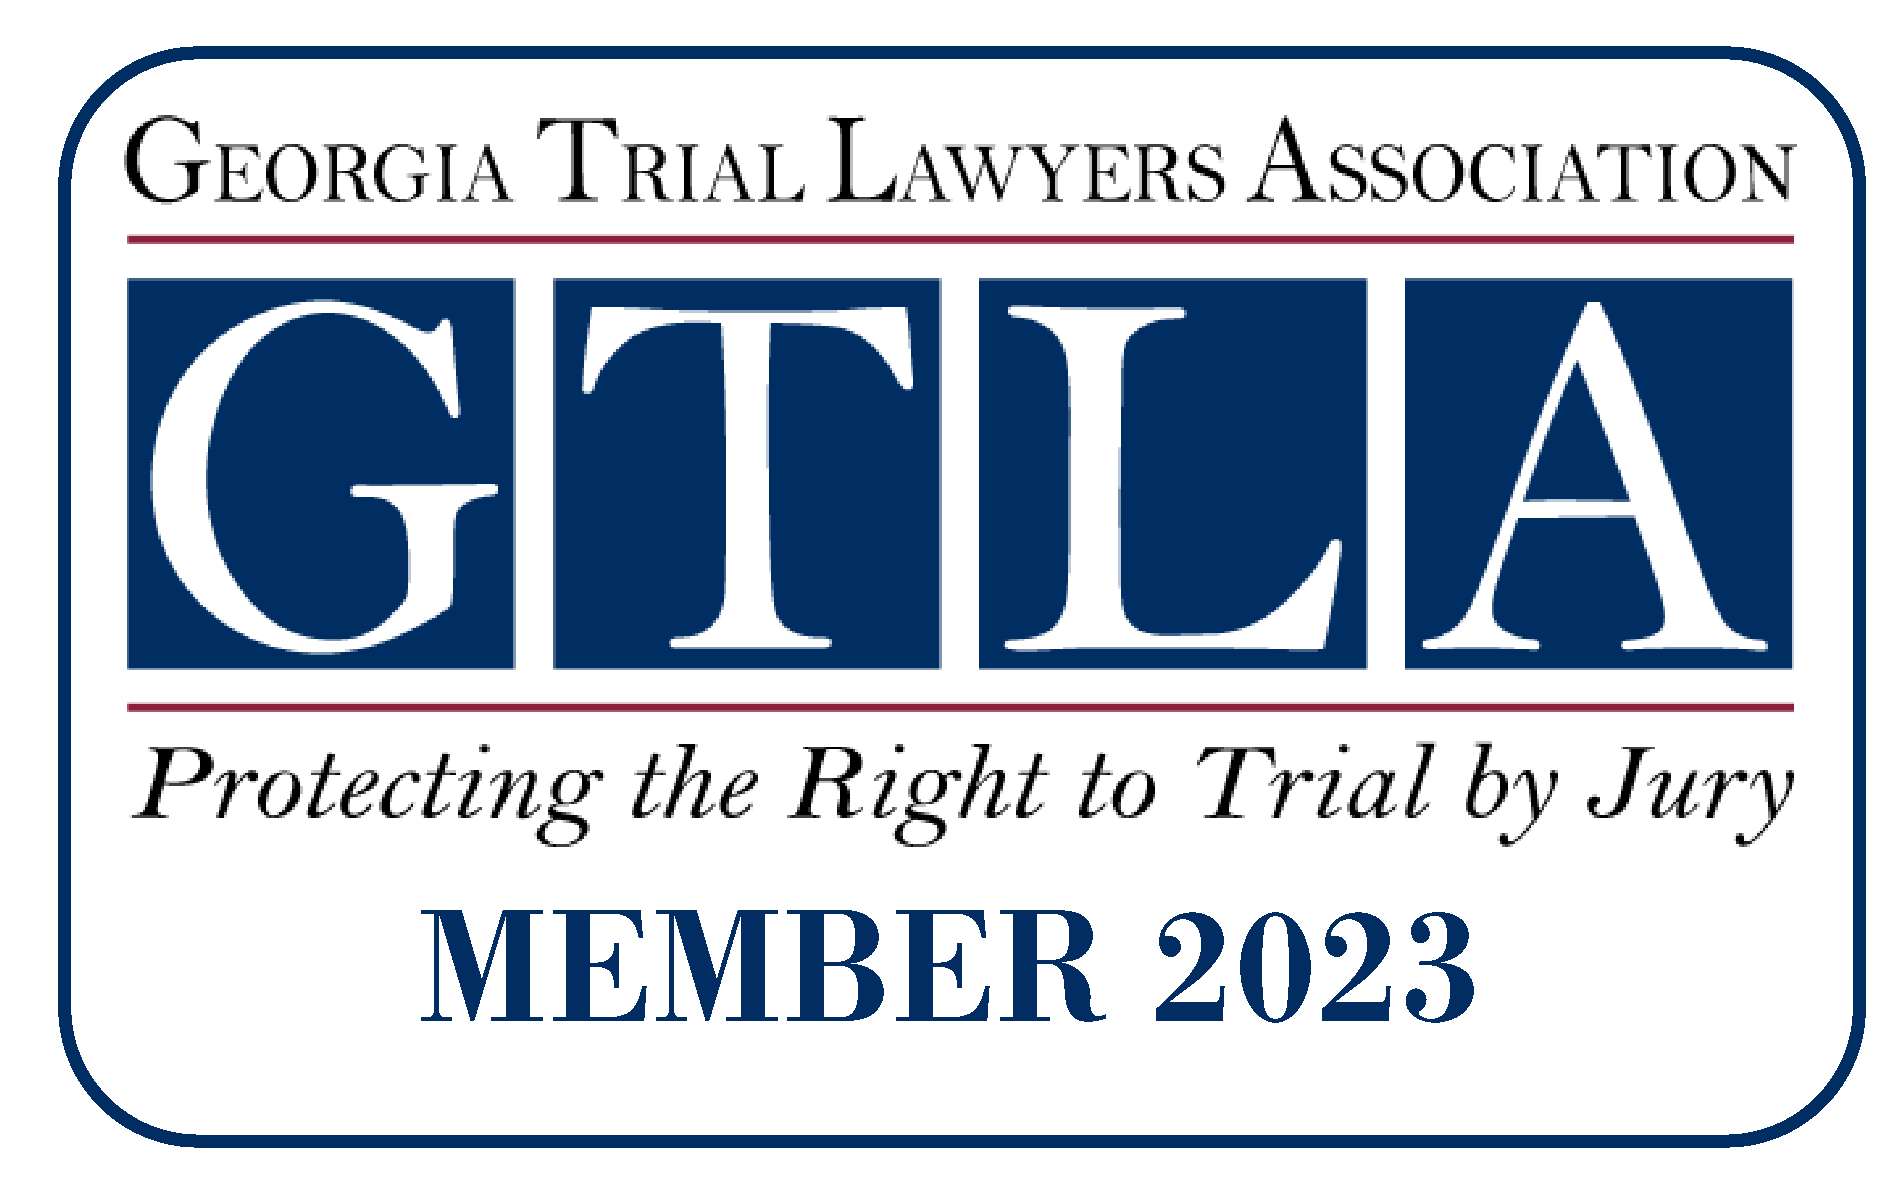 Georgia Trial Lawyers Association | GTLA | Protecting the Right to Trial by Jury | MEMBER 2023